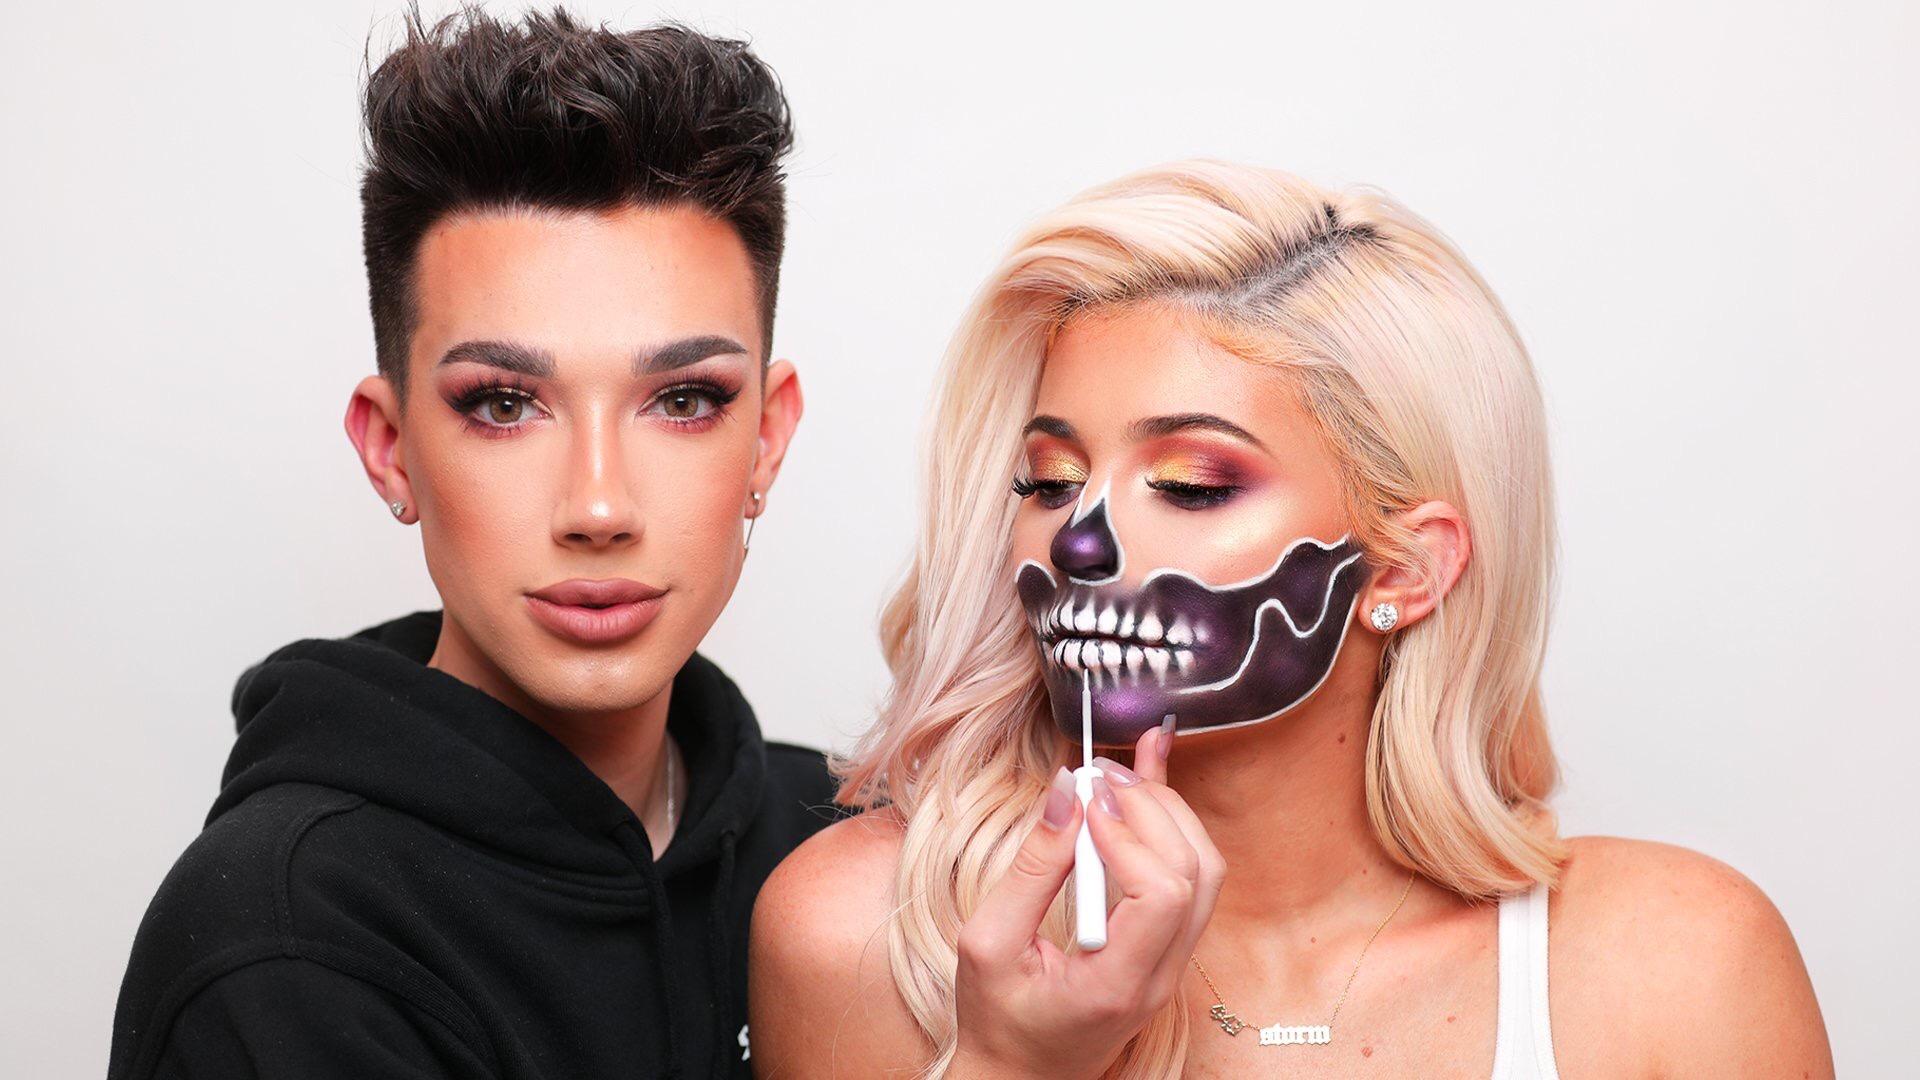 Hi Sisters!” Kylie Jenner and beauty vlogger James Charles just